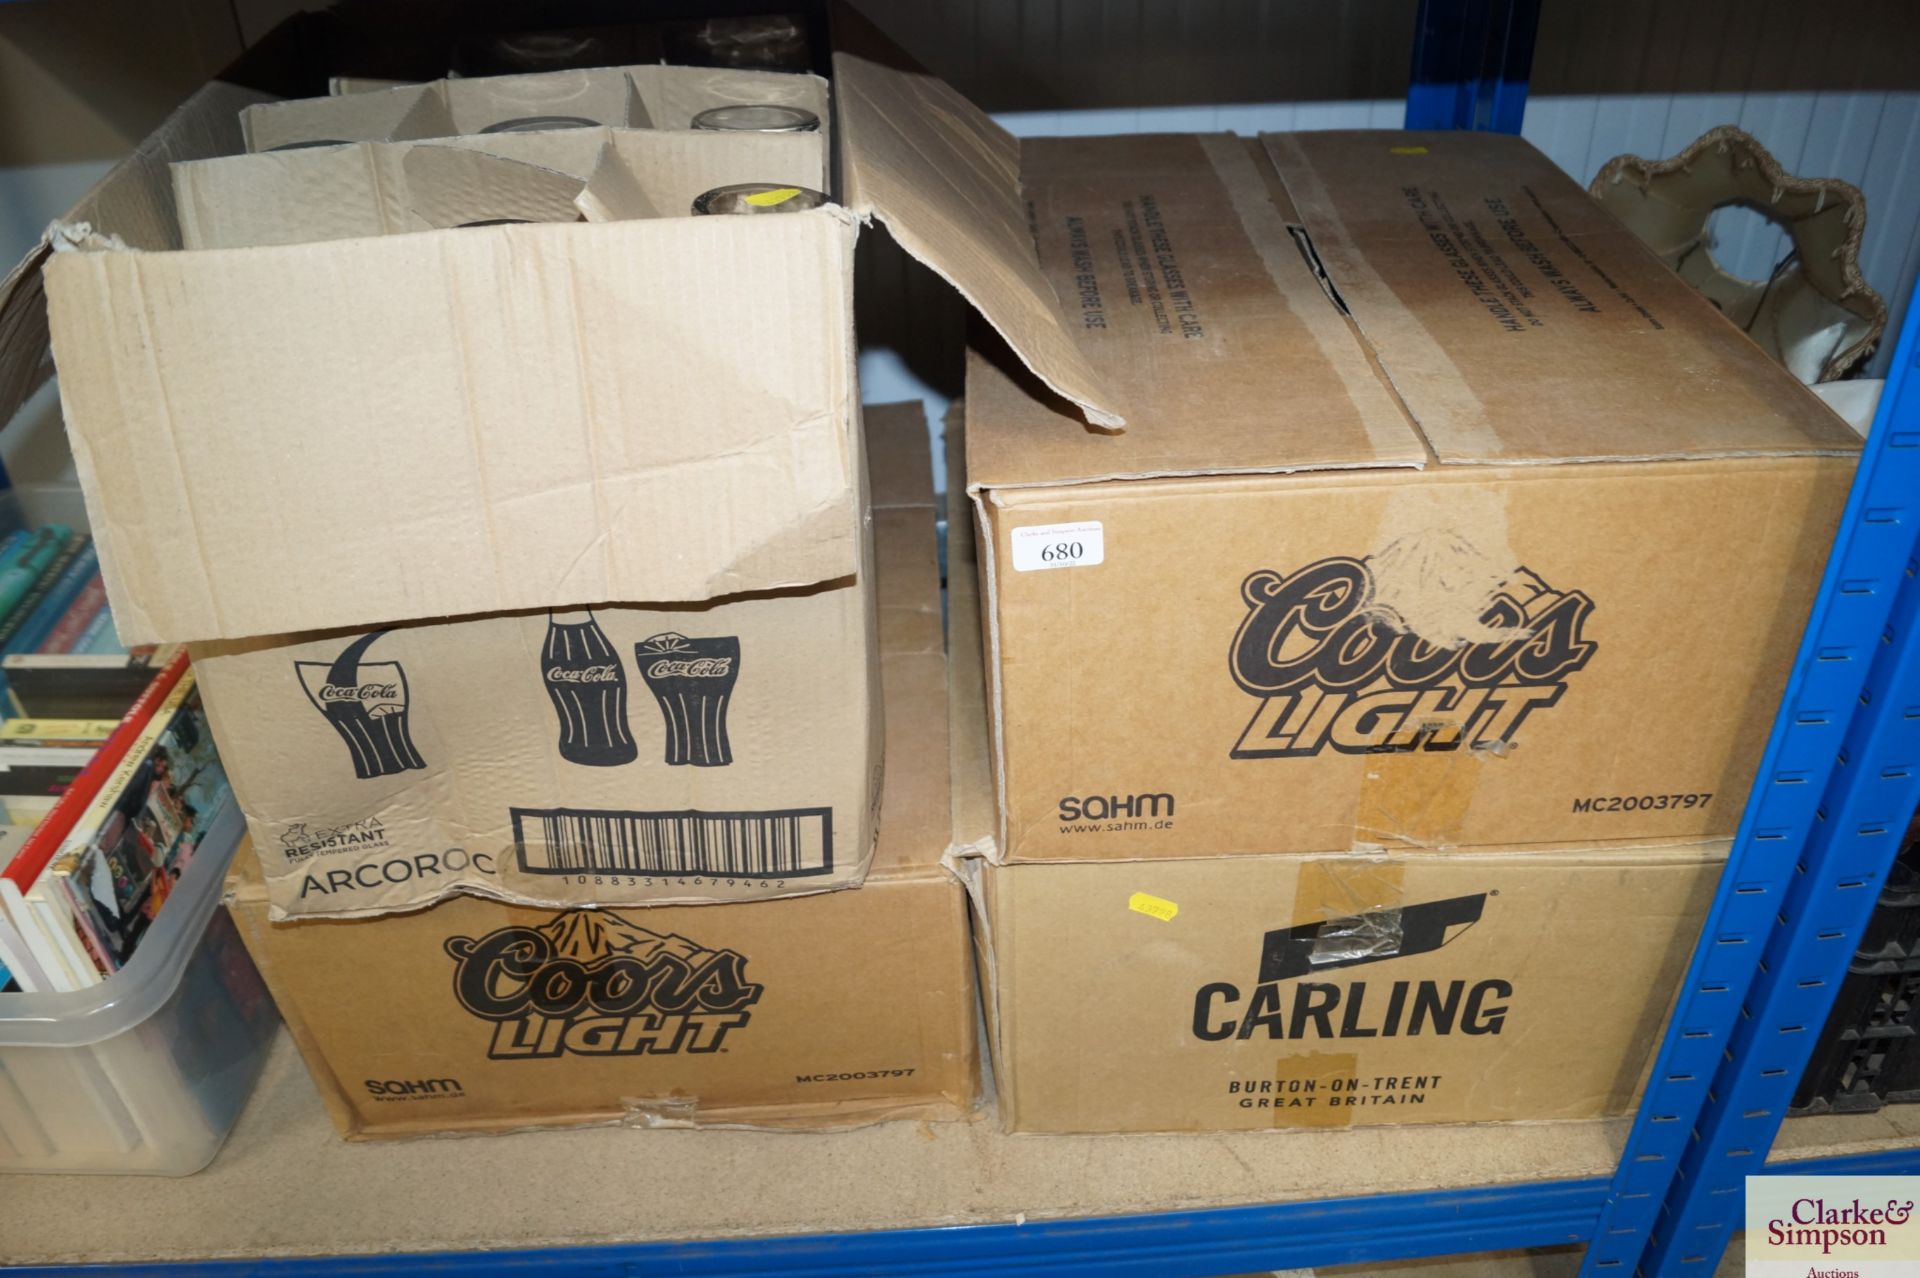 Four boxes of Carling, Coca-Cola and Kors Light gl